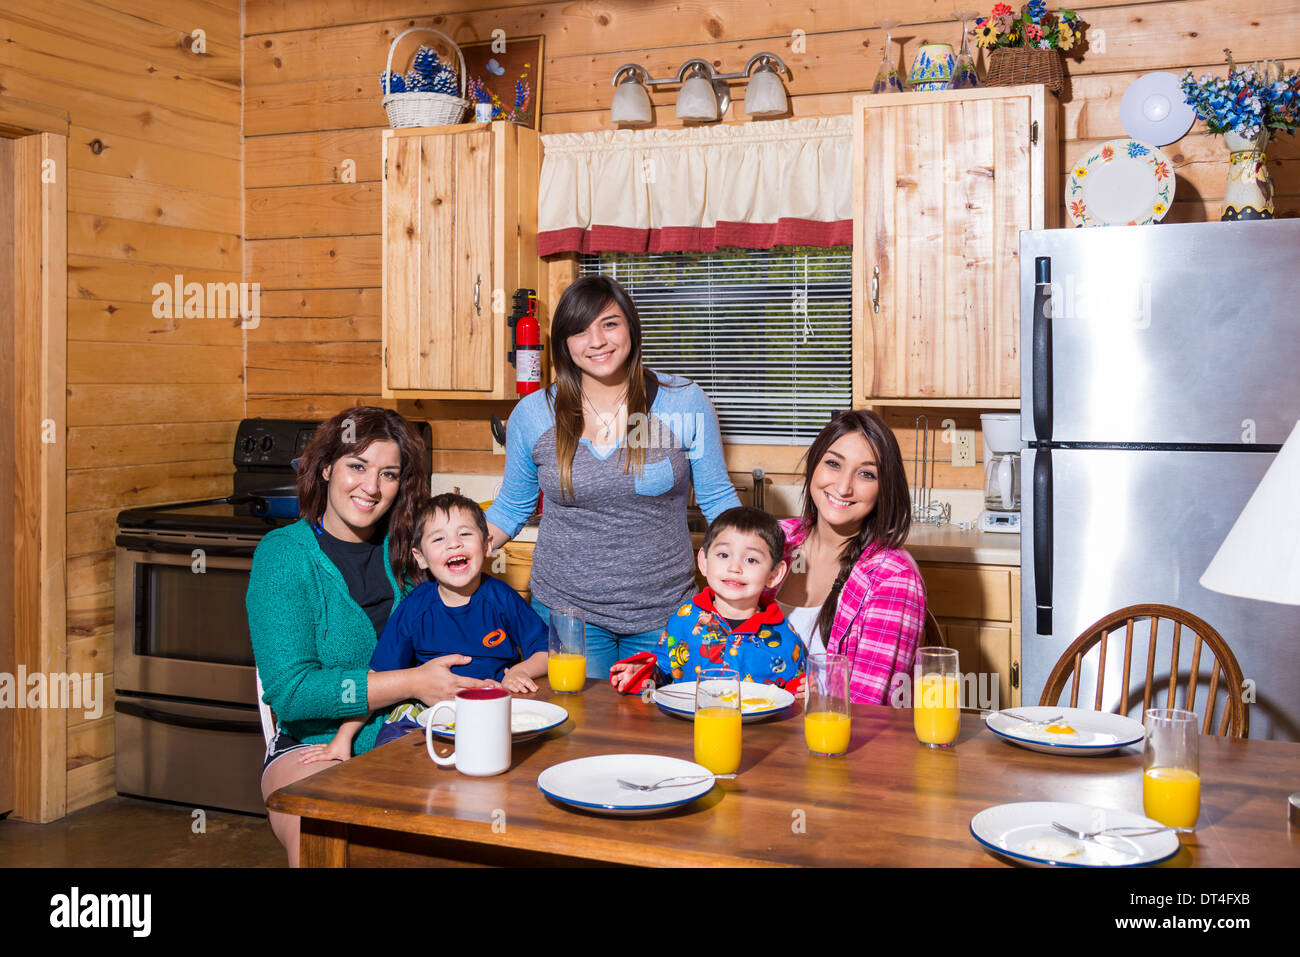 Family picture of 3 adult sisters with two children. The young boys are 3 years. All are of Hispanic ethnicity. Stock Photo